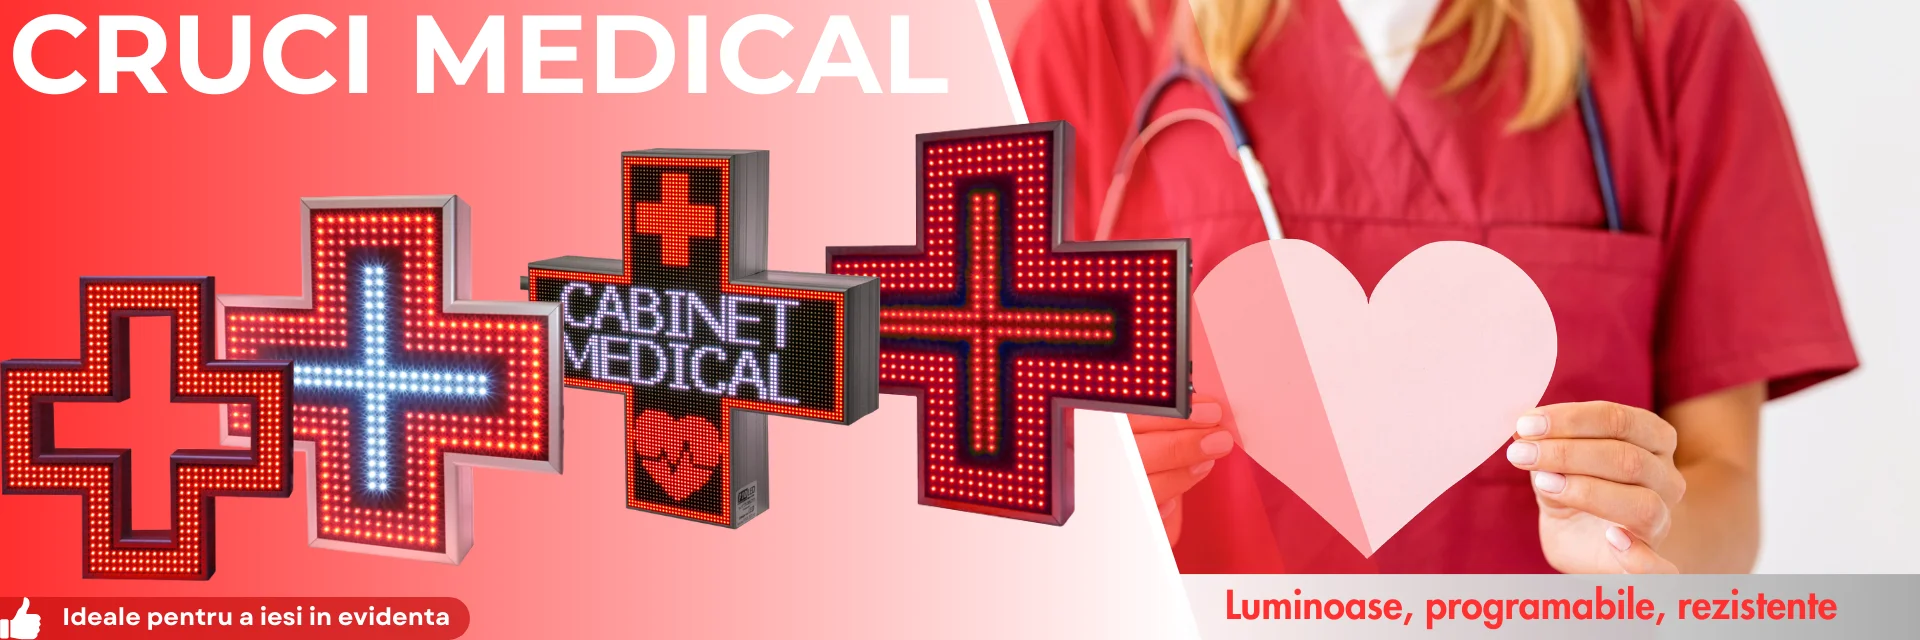 medic_cruce_exterior_led_color_rgb_rosie_spital_clinica_policlinica